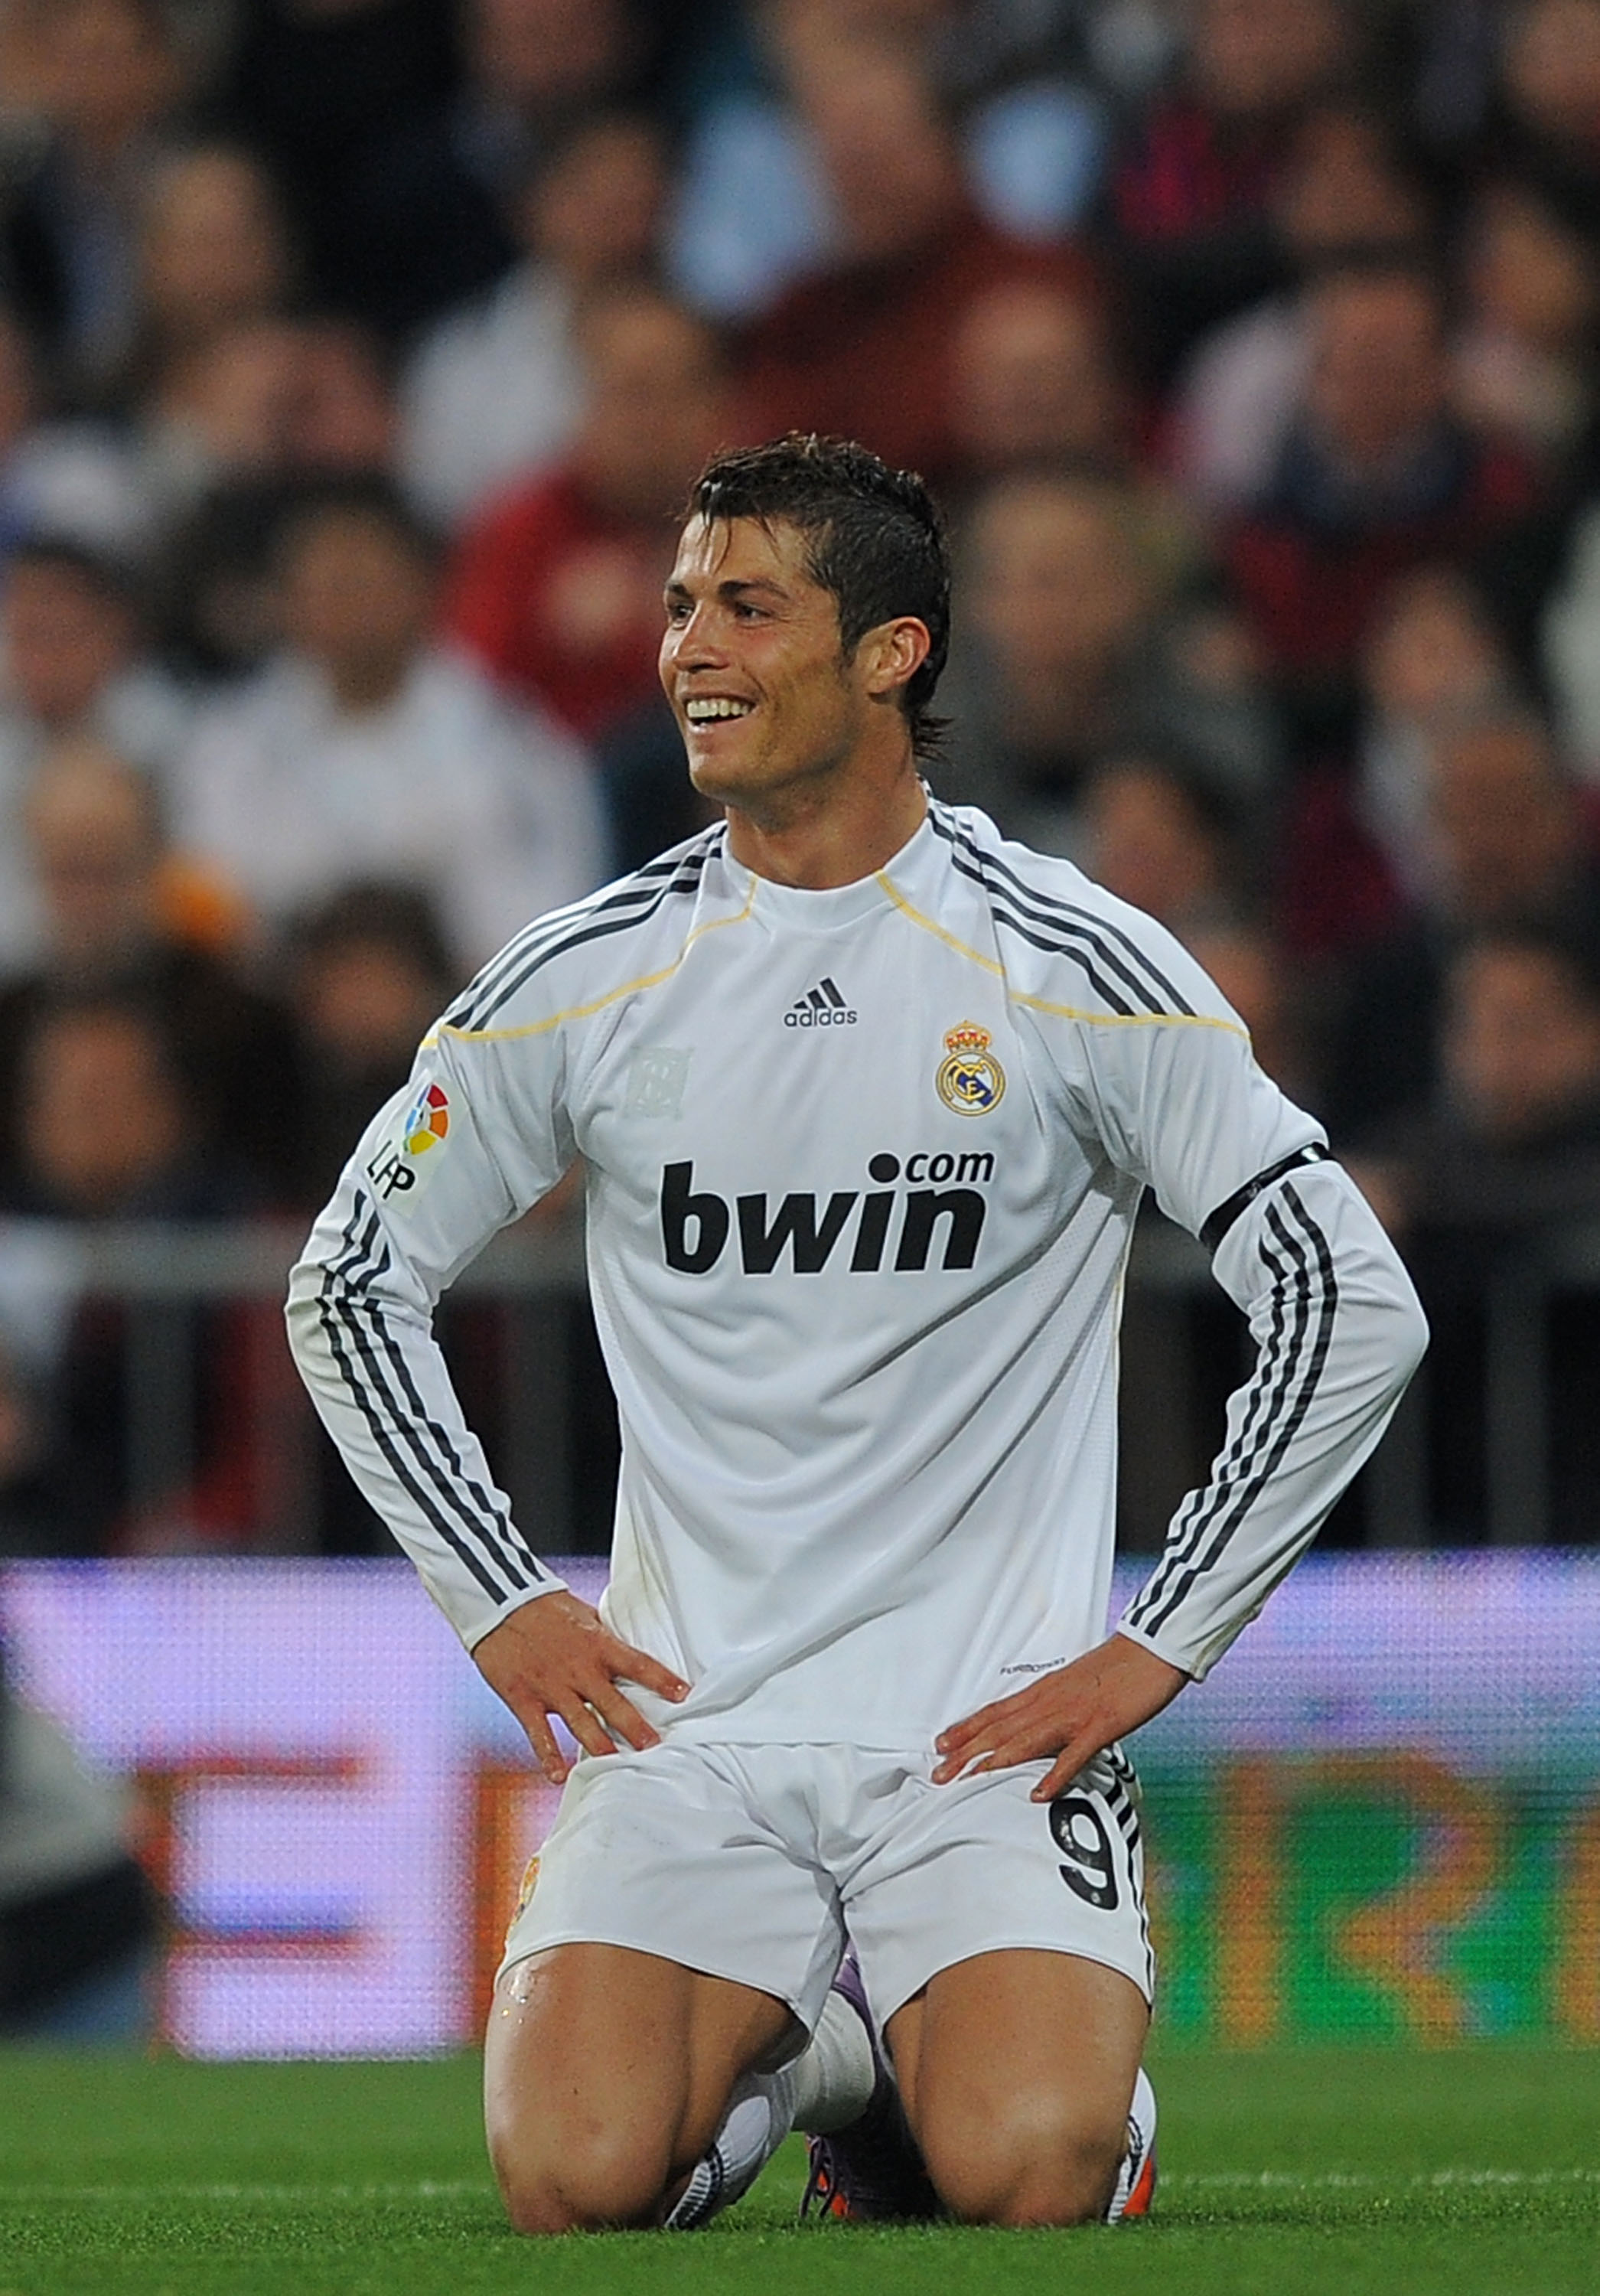 MADRID, SPAIN - APRIL 10: Cristiano Ronaldo of Real Madrid reacts during the La Liga match between Real Madrid and Barcelona at the Estadio Santiago Bernabeu on April 10, 2010 in Madrid, Spain.  (Photo by Denis Doyle/Getty Images)